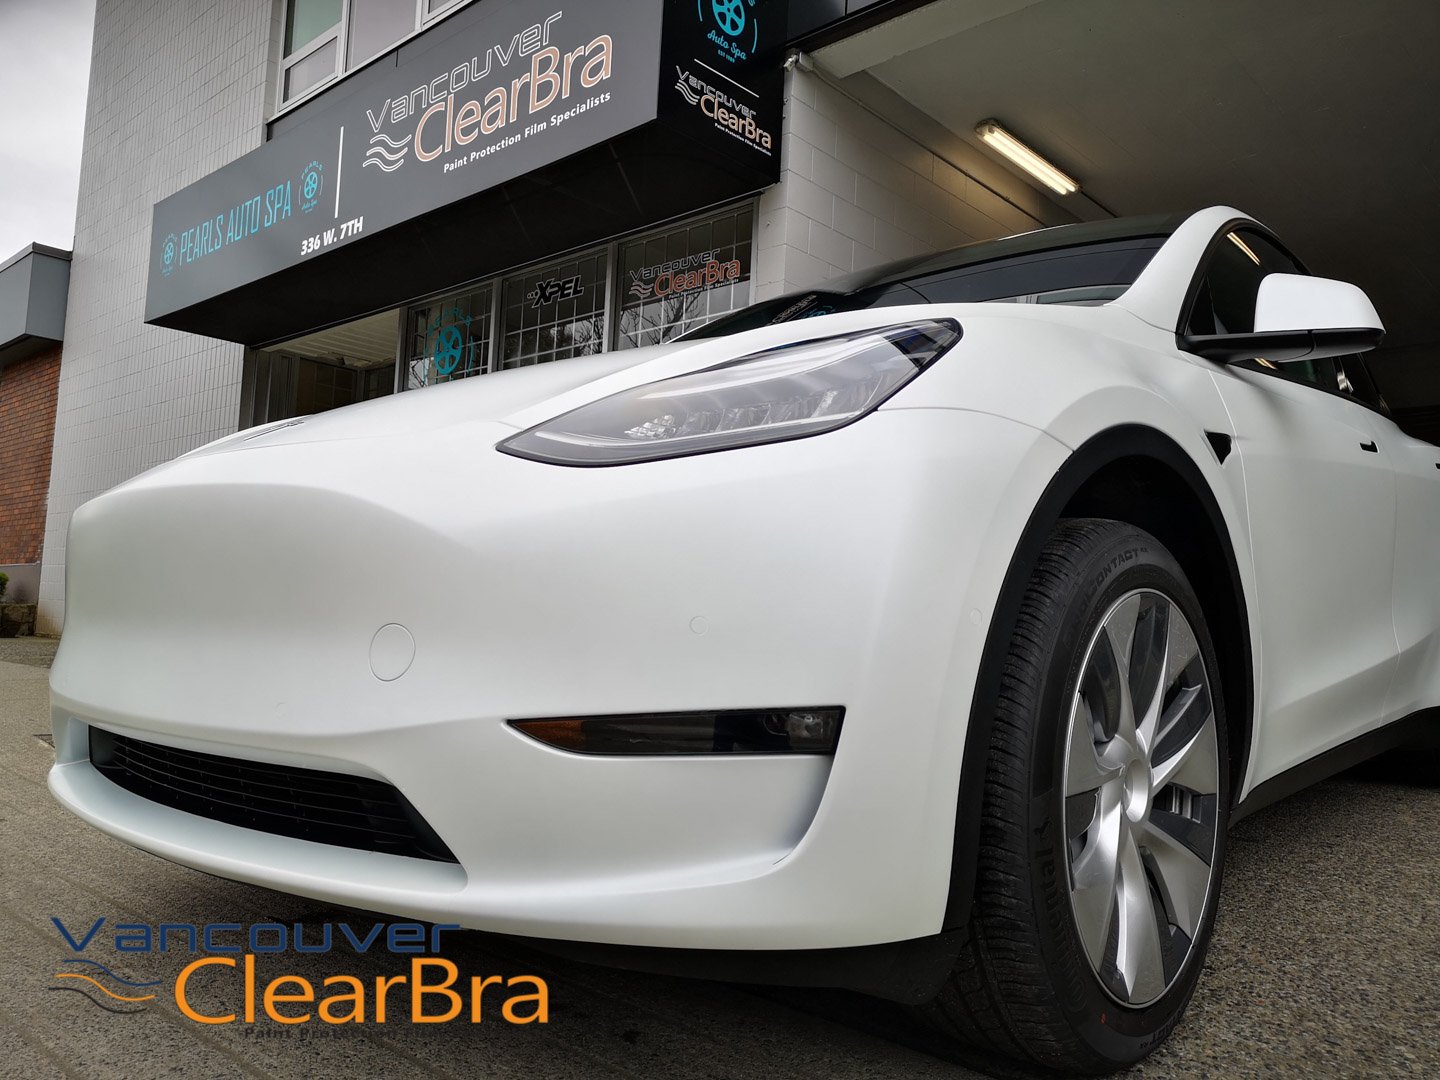 xpel-ultimate-xpel-stealth-satin-clear-bra-paint-protection-film-Vancouver-ClearBra-158.jpg